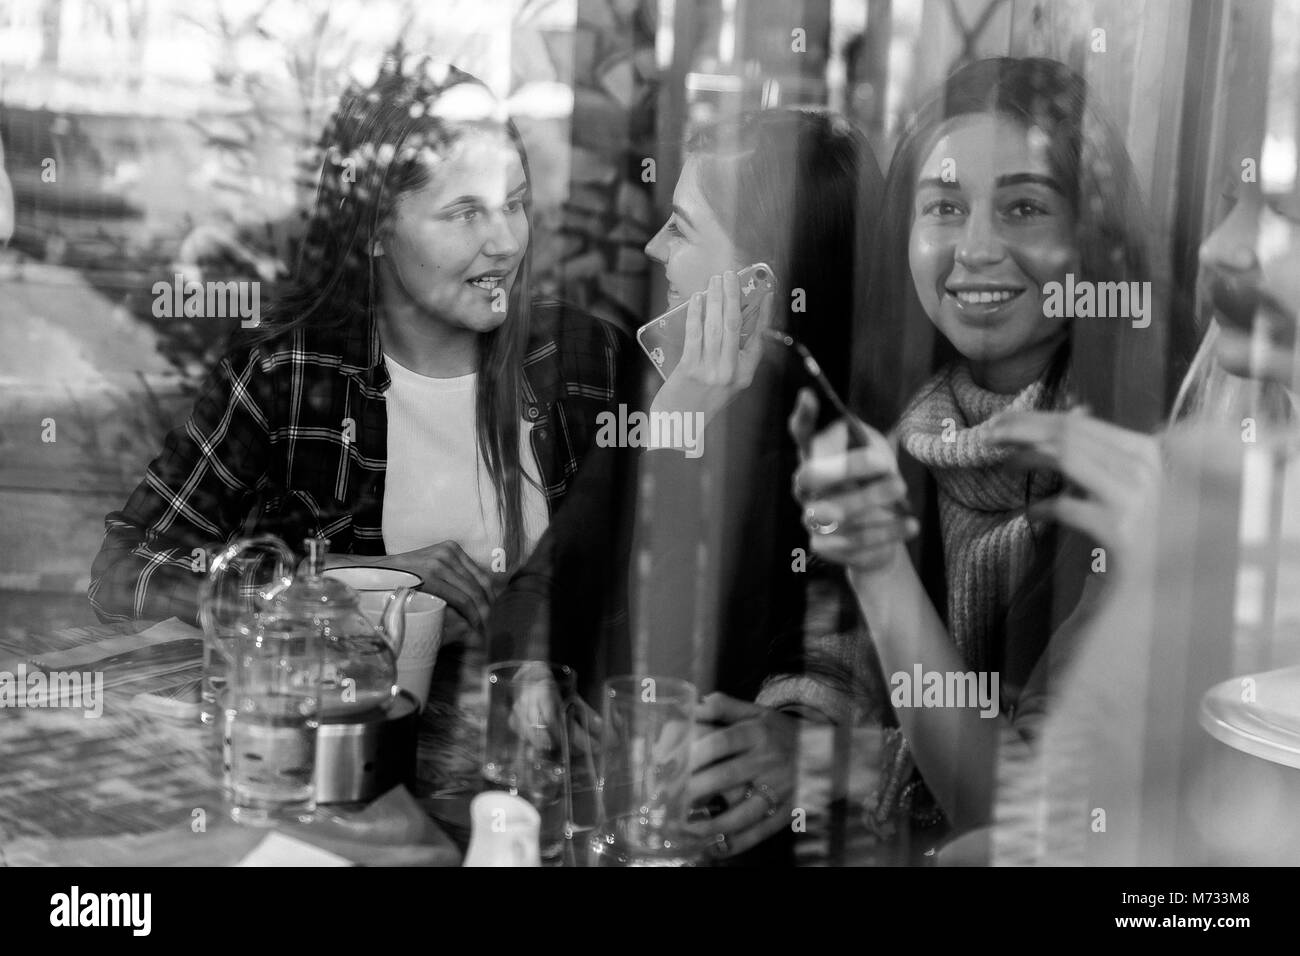 friends enjoying coffee together in a coffee shop viewed through glass with reflections Stock Photo